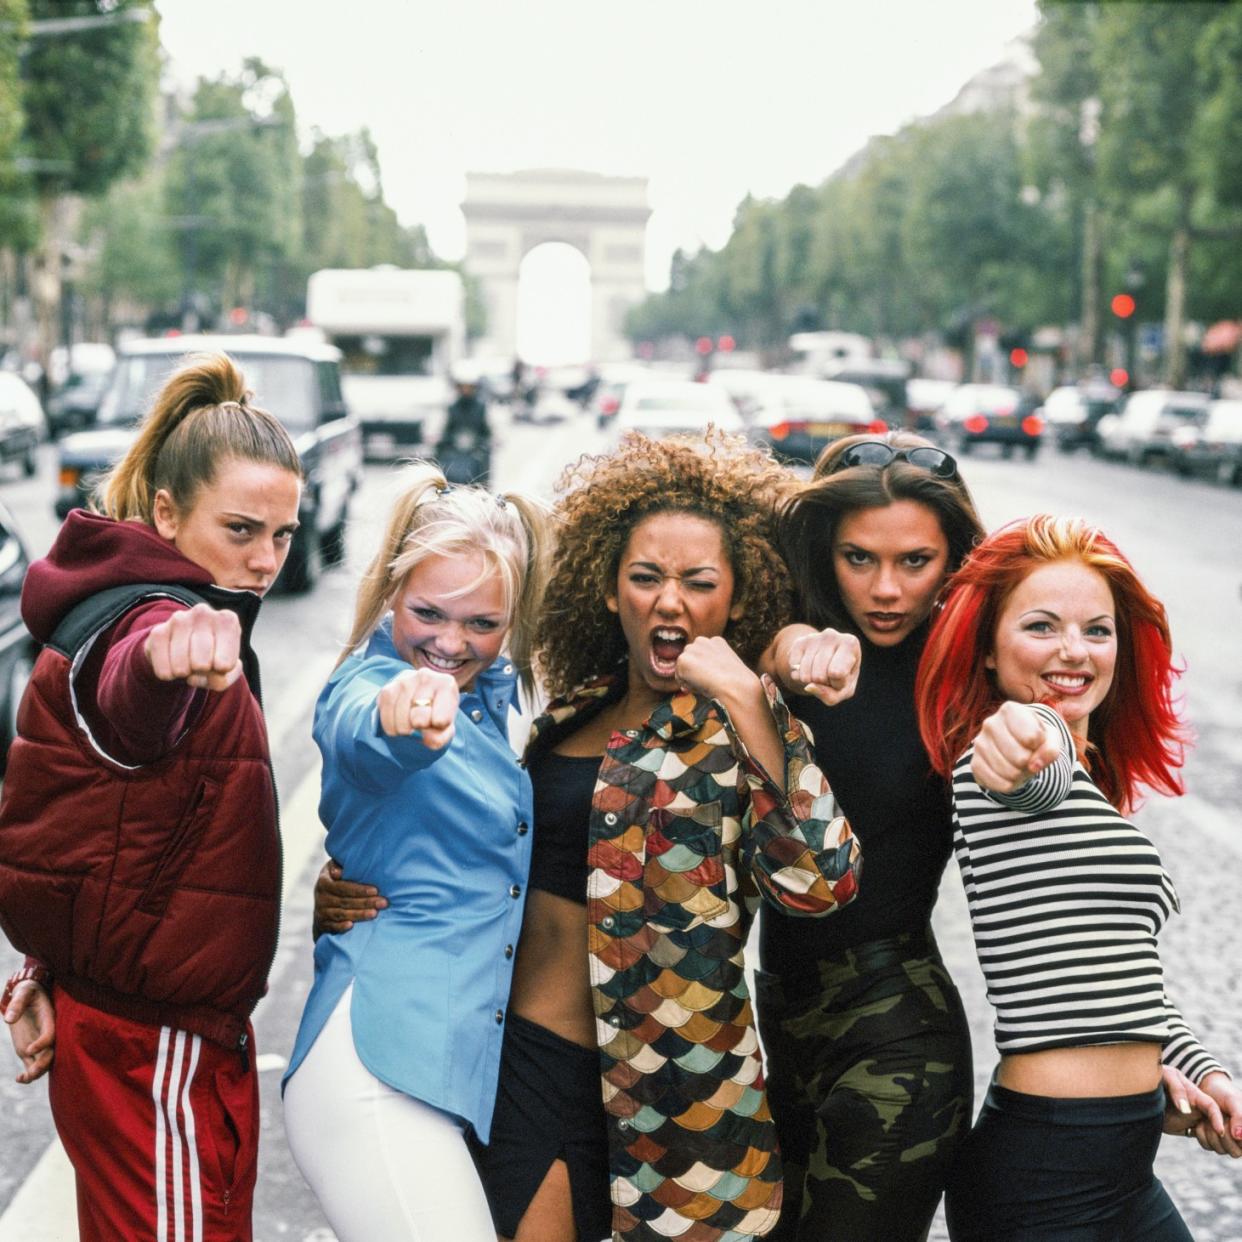  English pop group The Spice Girls, Paris, September 1996. Left to right: Melanie Chisholm, Emma Bunton, Melanie Brown, Victoria Beckham and Geri Halliwell aka Sporty, Baby, Scary, Posh and Ginger Spice. 